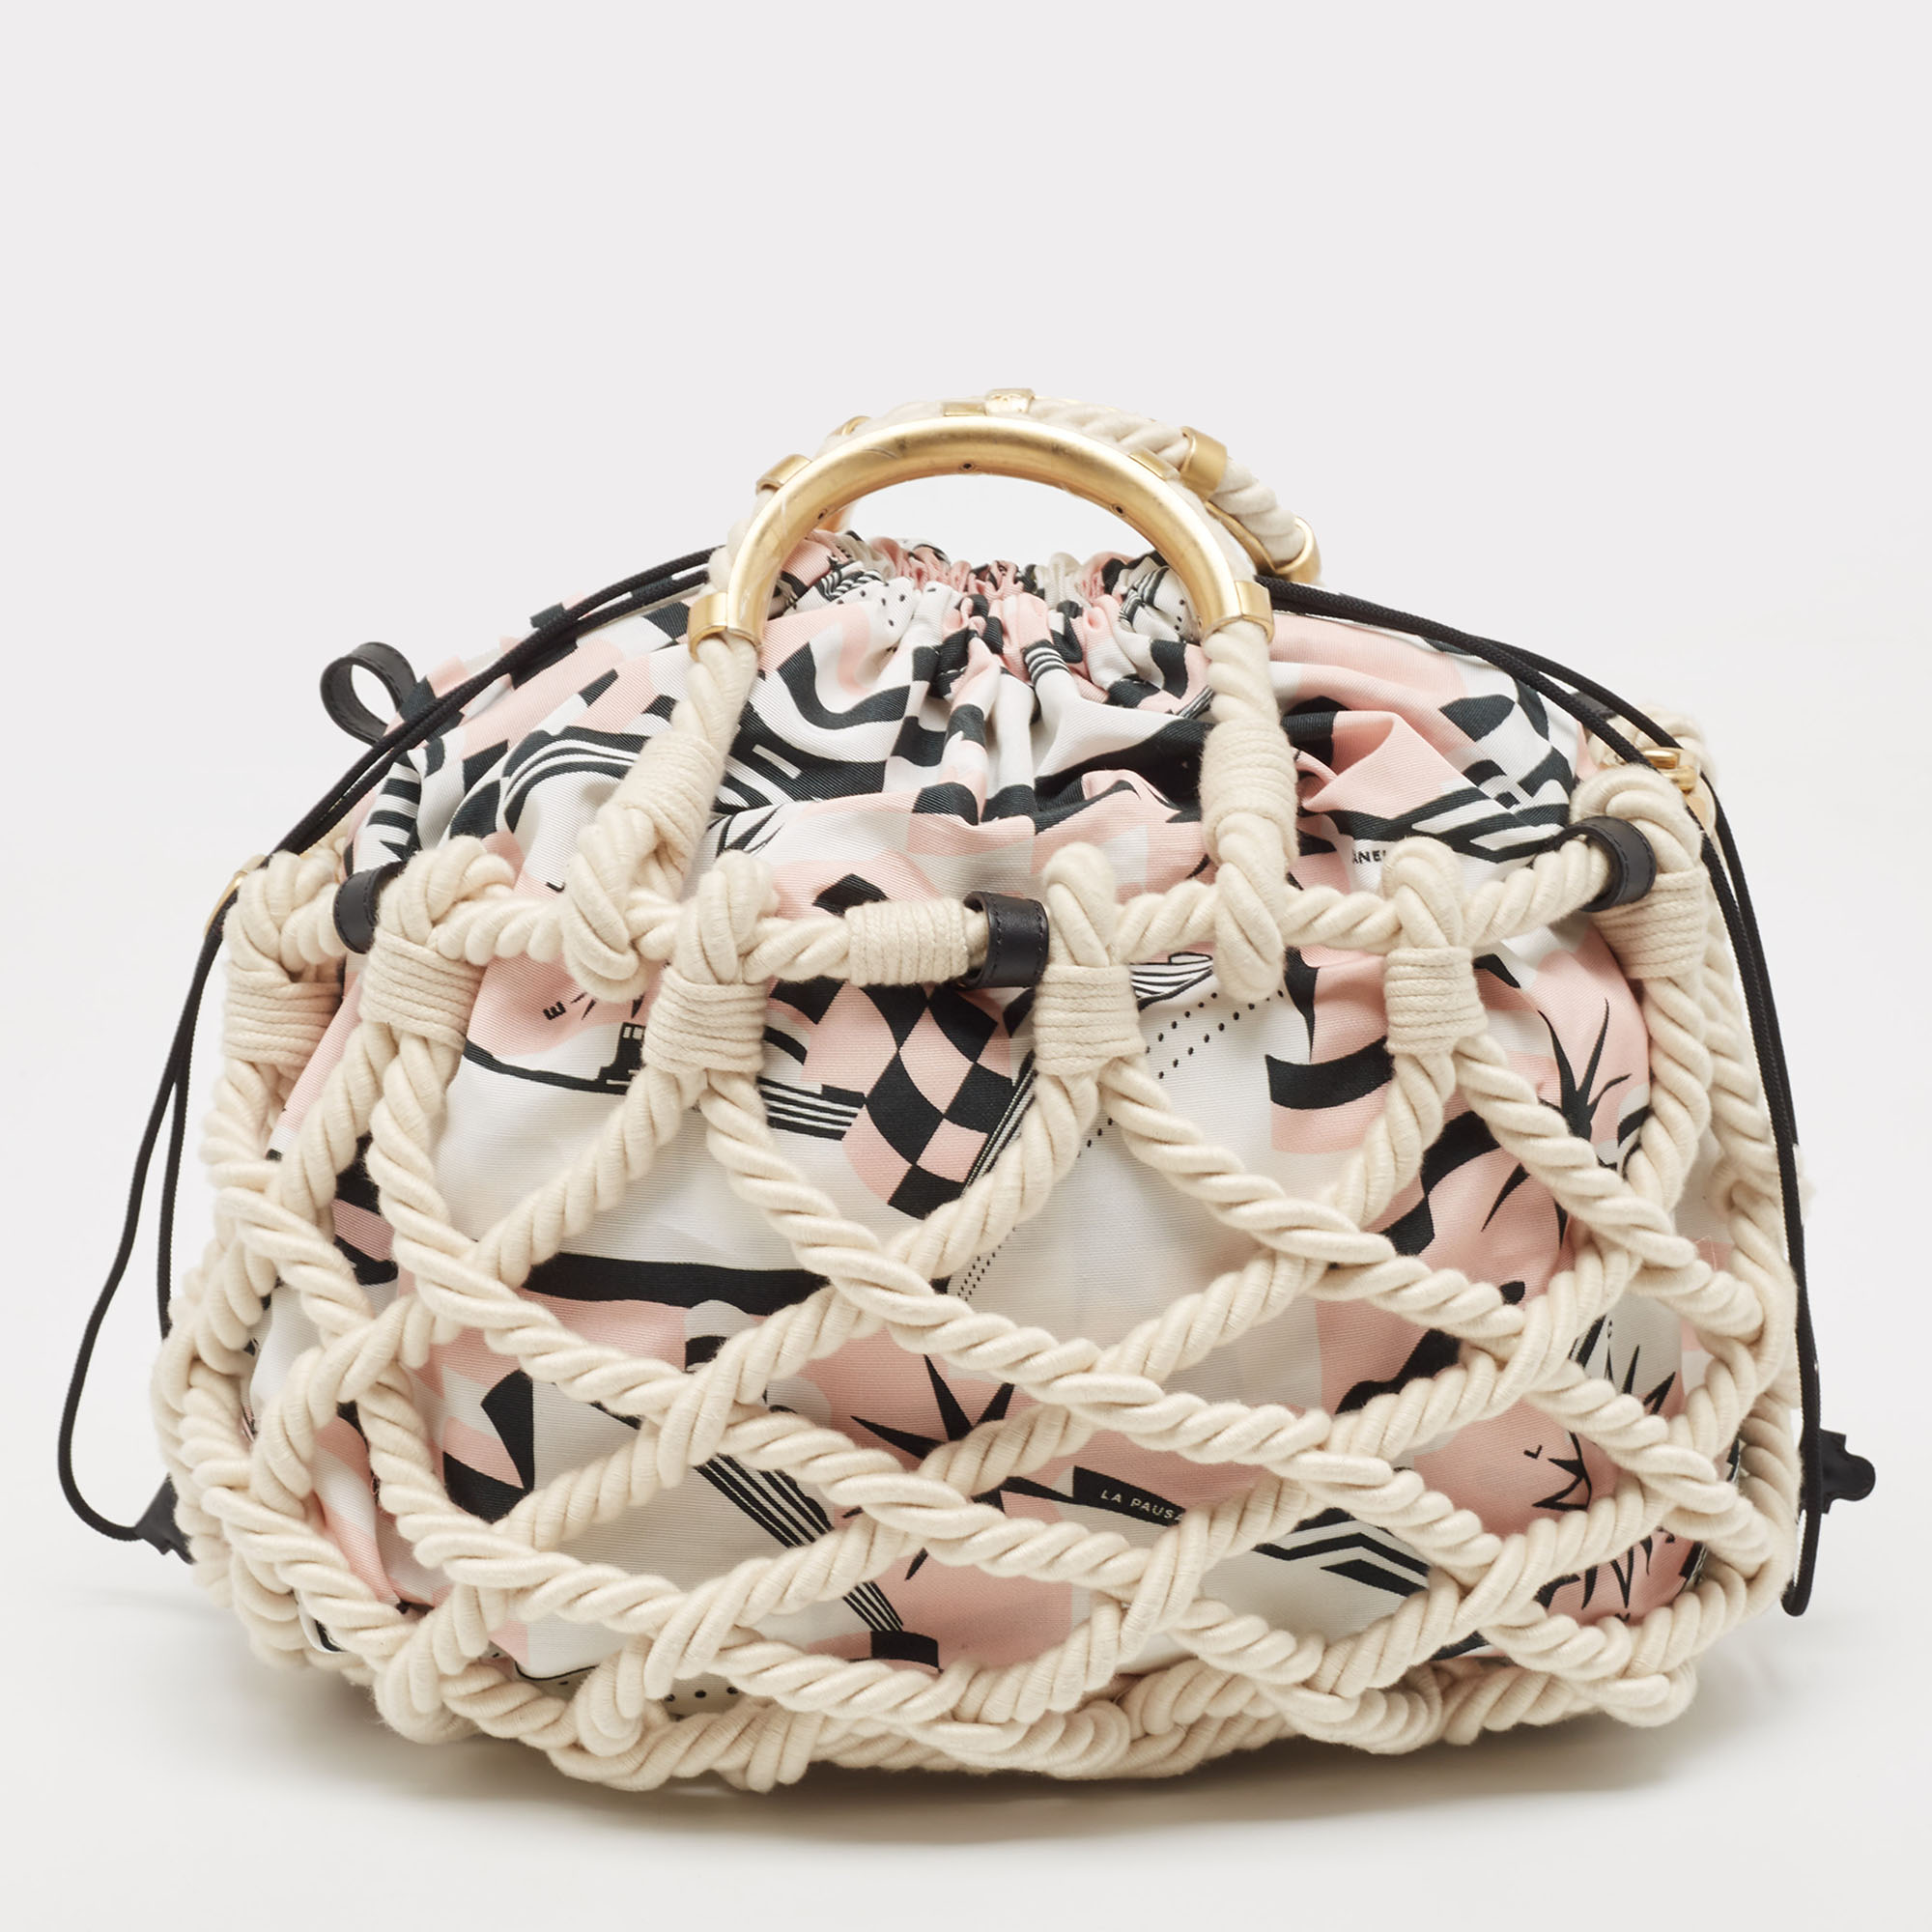 Chanel Multicolor Printed Fabric And Rope Shopper Tote